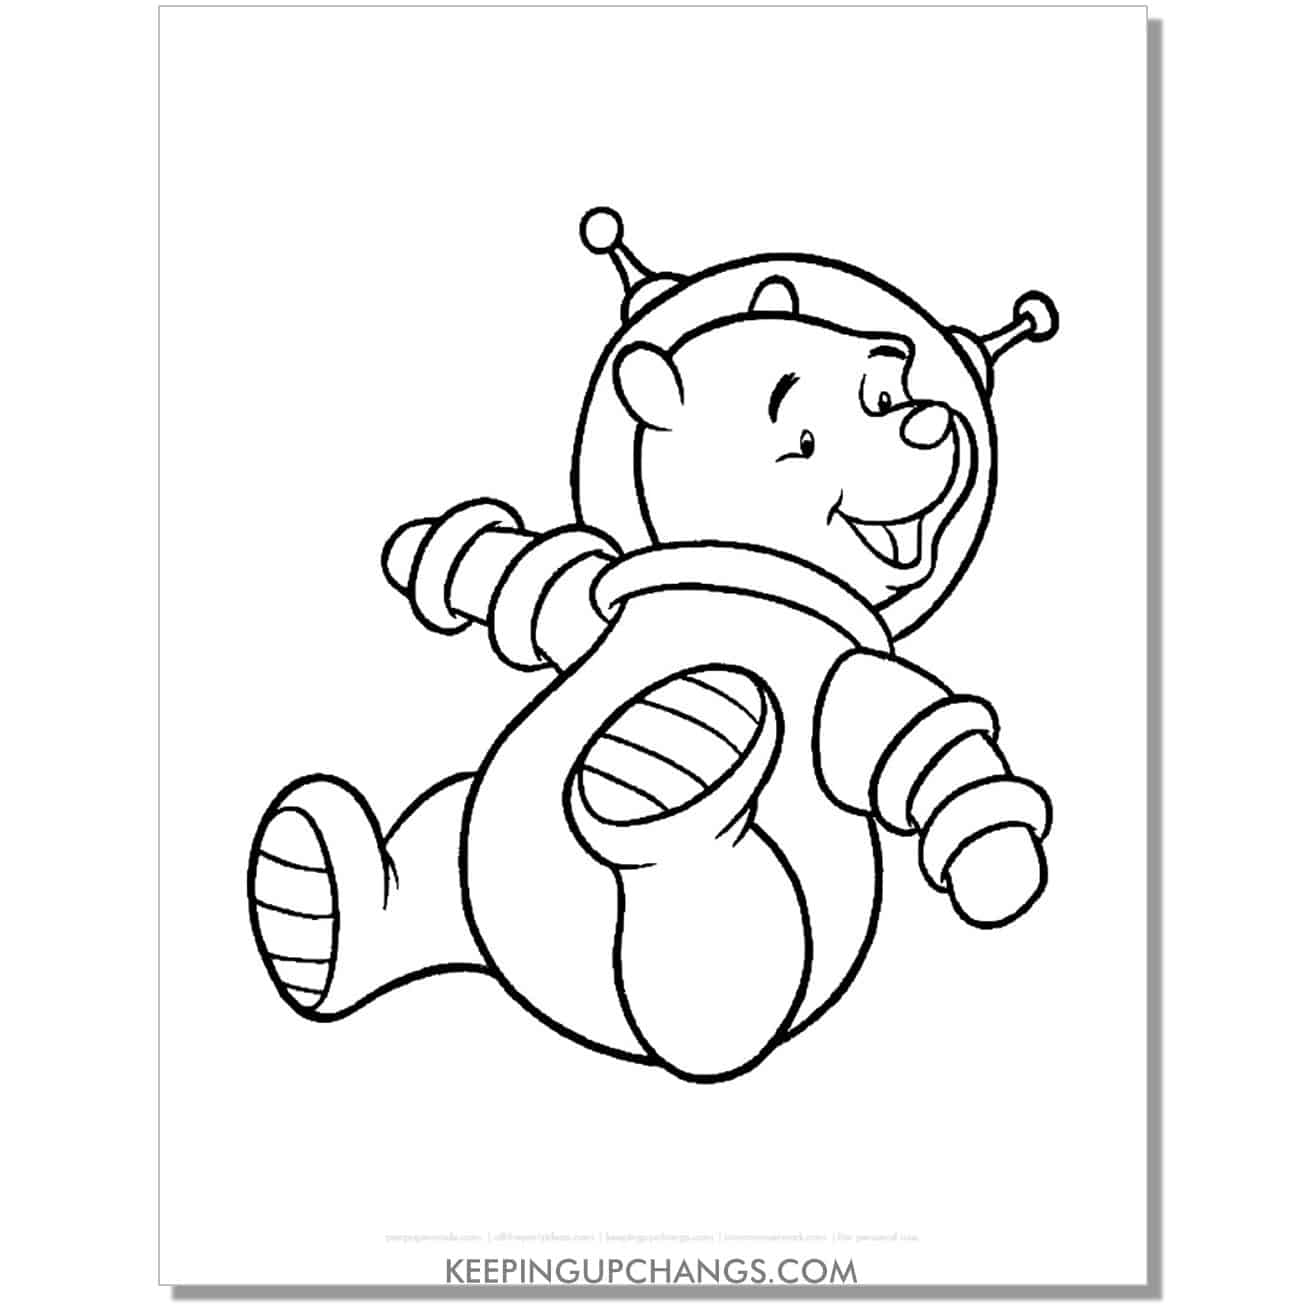 winnie the pooh in astronaut spacesuit waving coloring page, sheet.